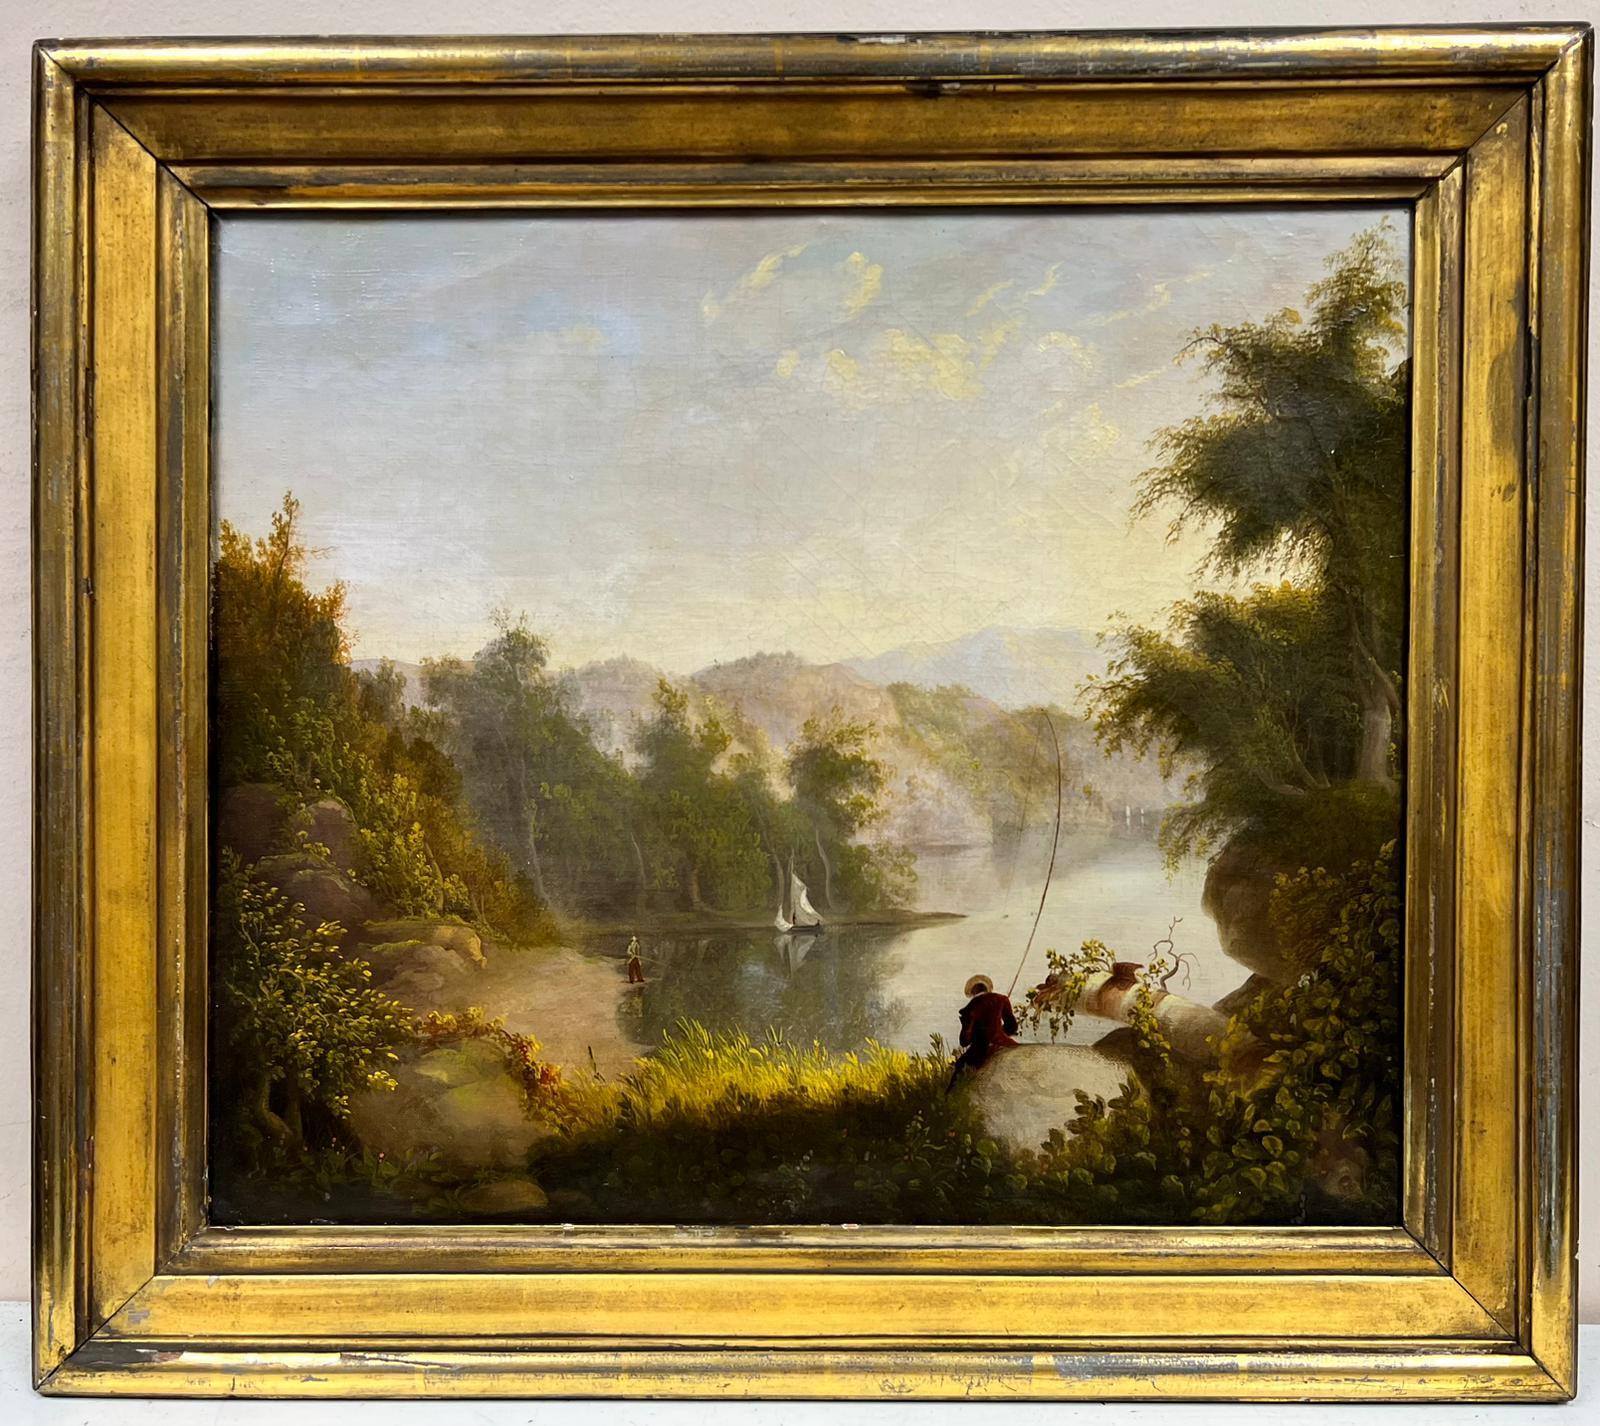 Artist/ School: American School, mid 19th century. The work is close to the Hudson River School painters of the period. 

Title: Angler in Romantic Light landscape

Medium: oil on canvas, framed

Framed: 21.5 x 24.5 inches
Painting: 17 x 20